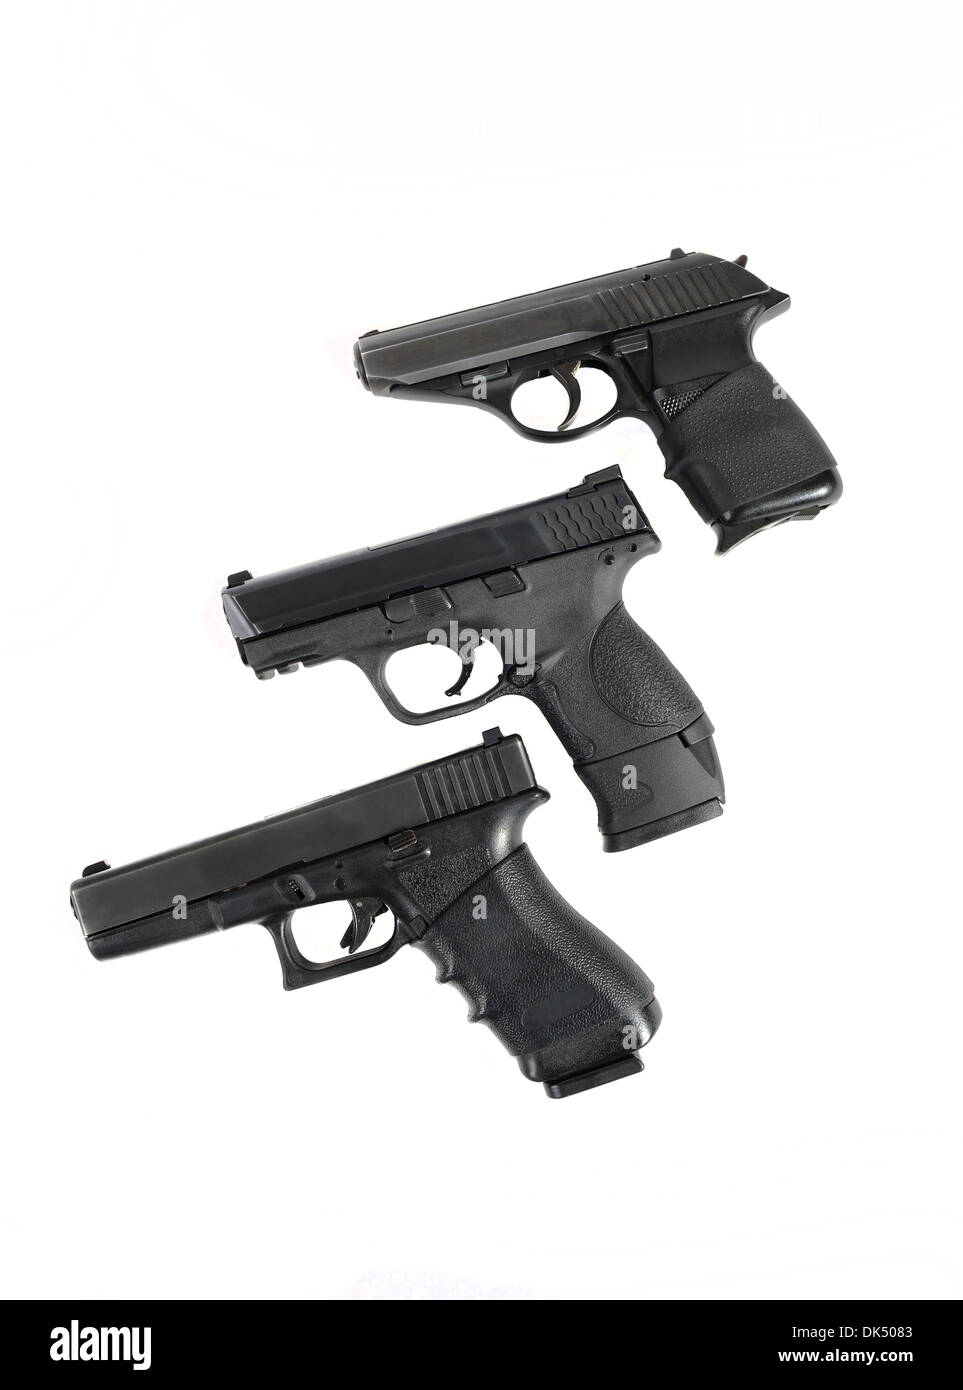 Three handguns in a row over white. No brands/makes markings. Stock Photo